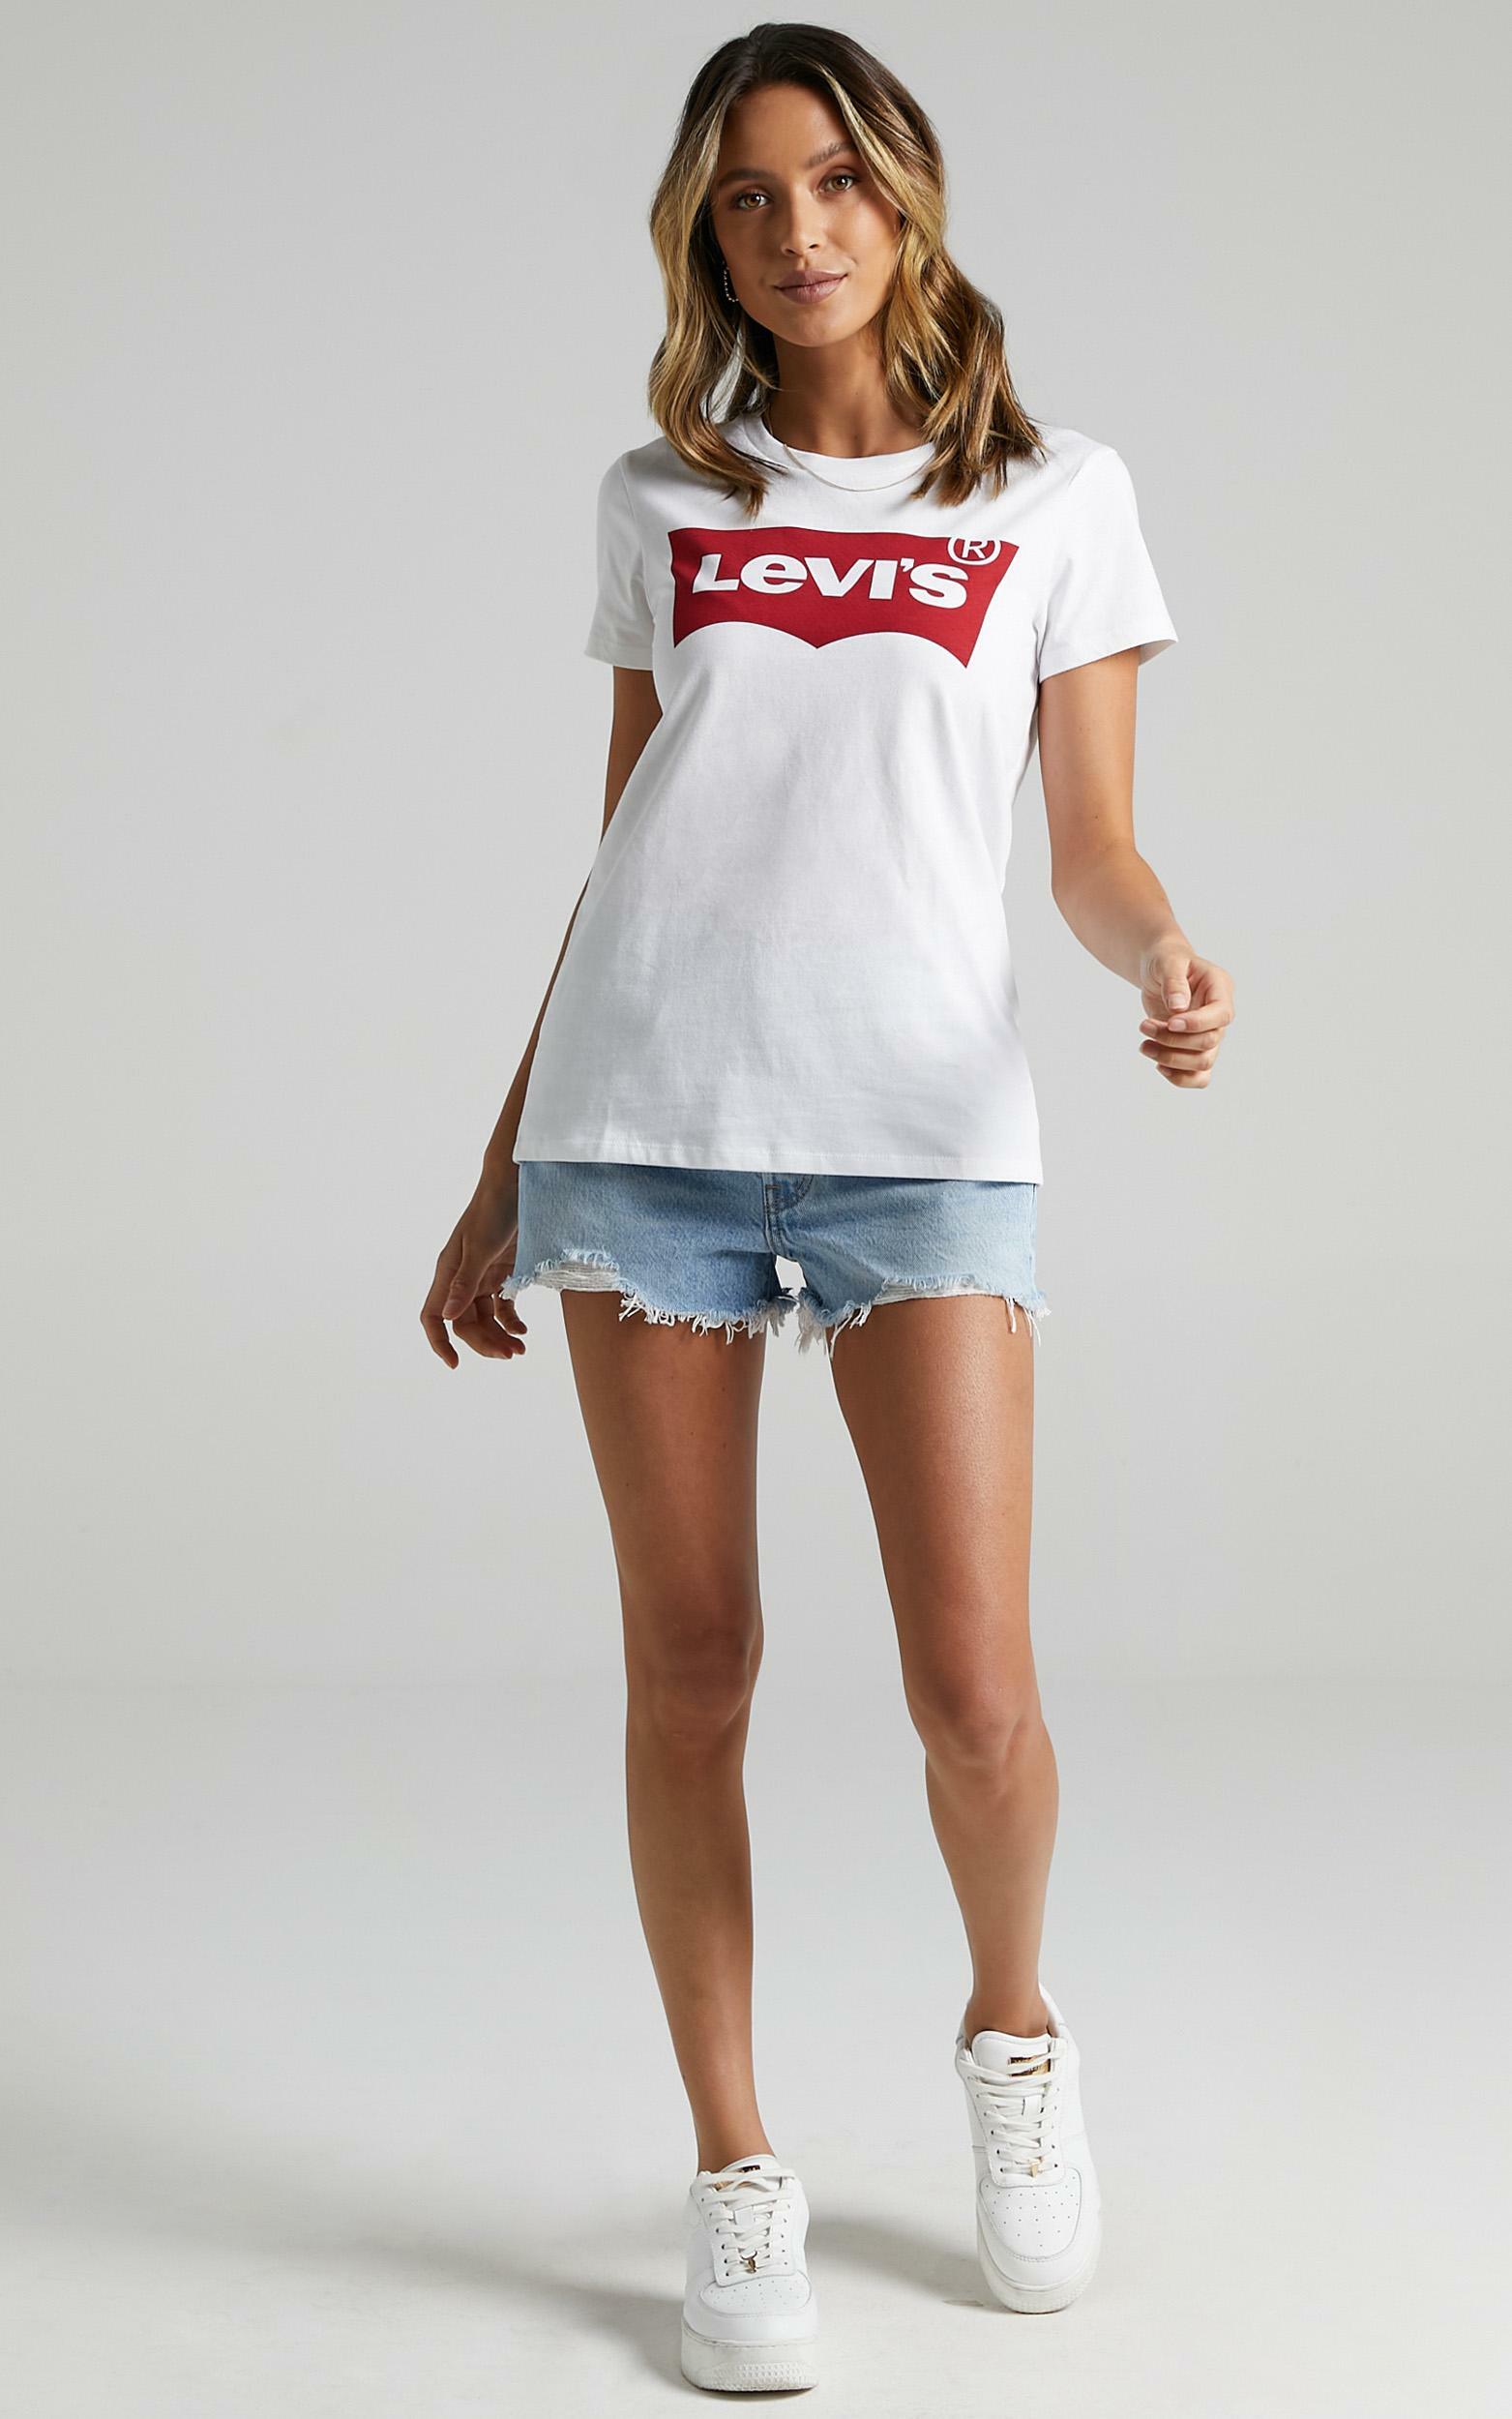 Levi's - Perfect Batwing Tee in White - XS, WHT1, hi-res image number null